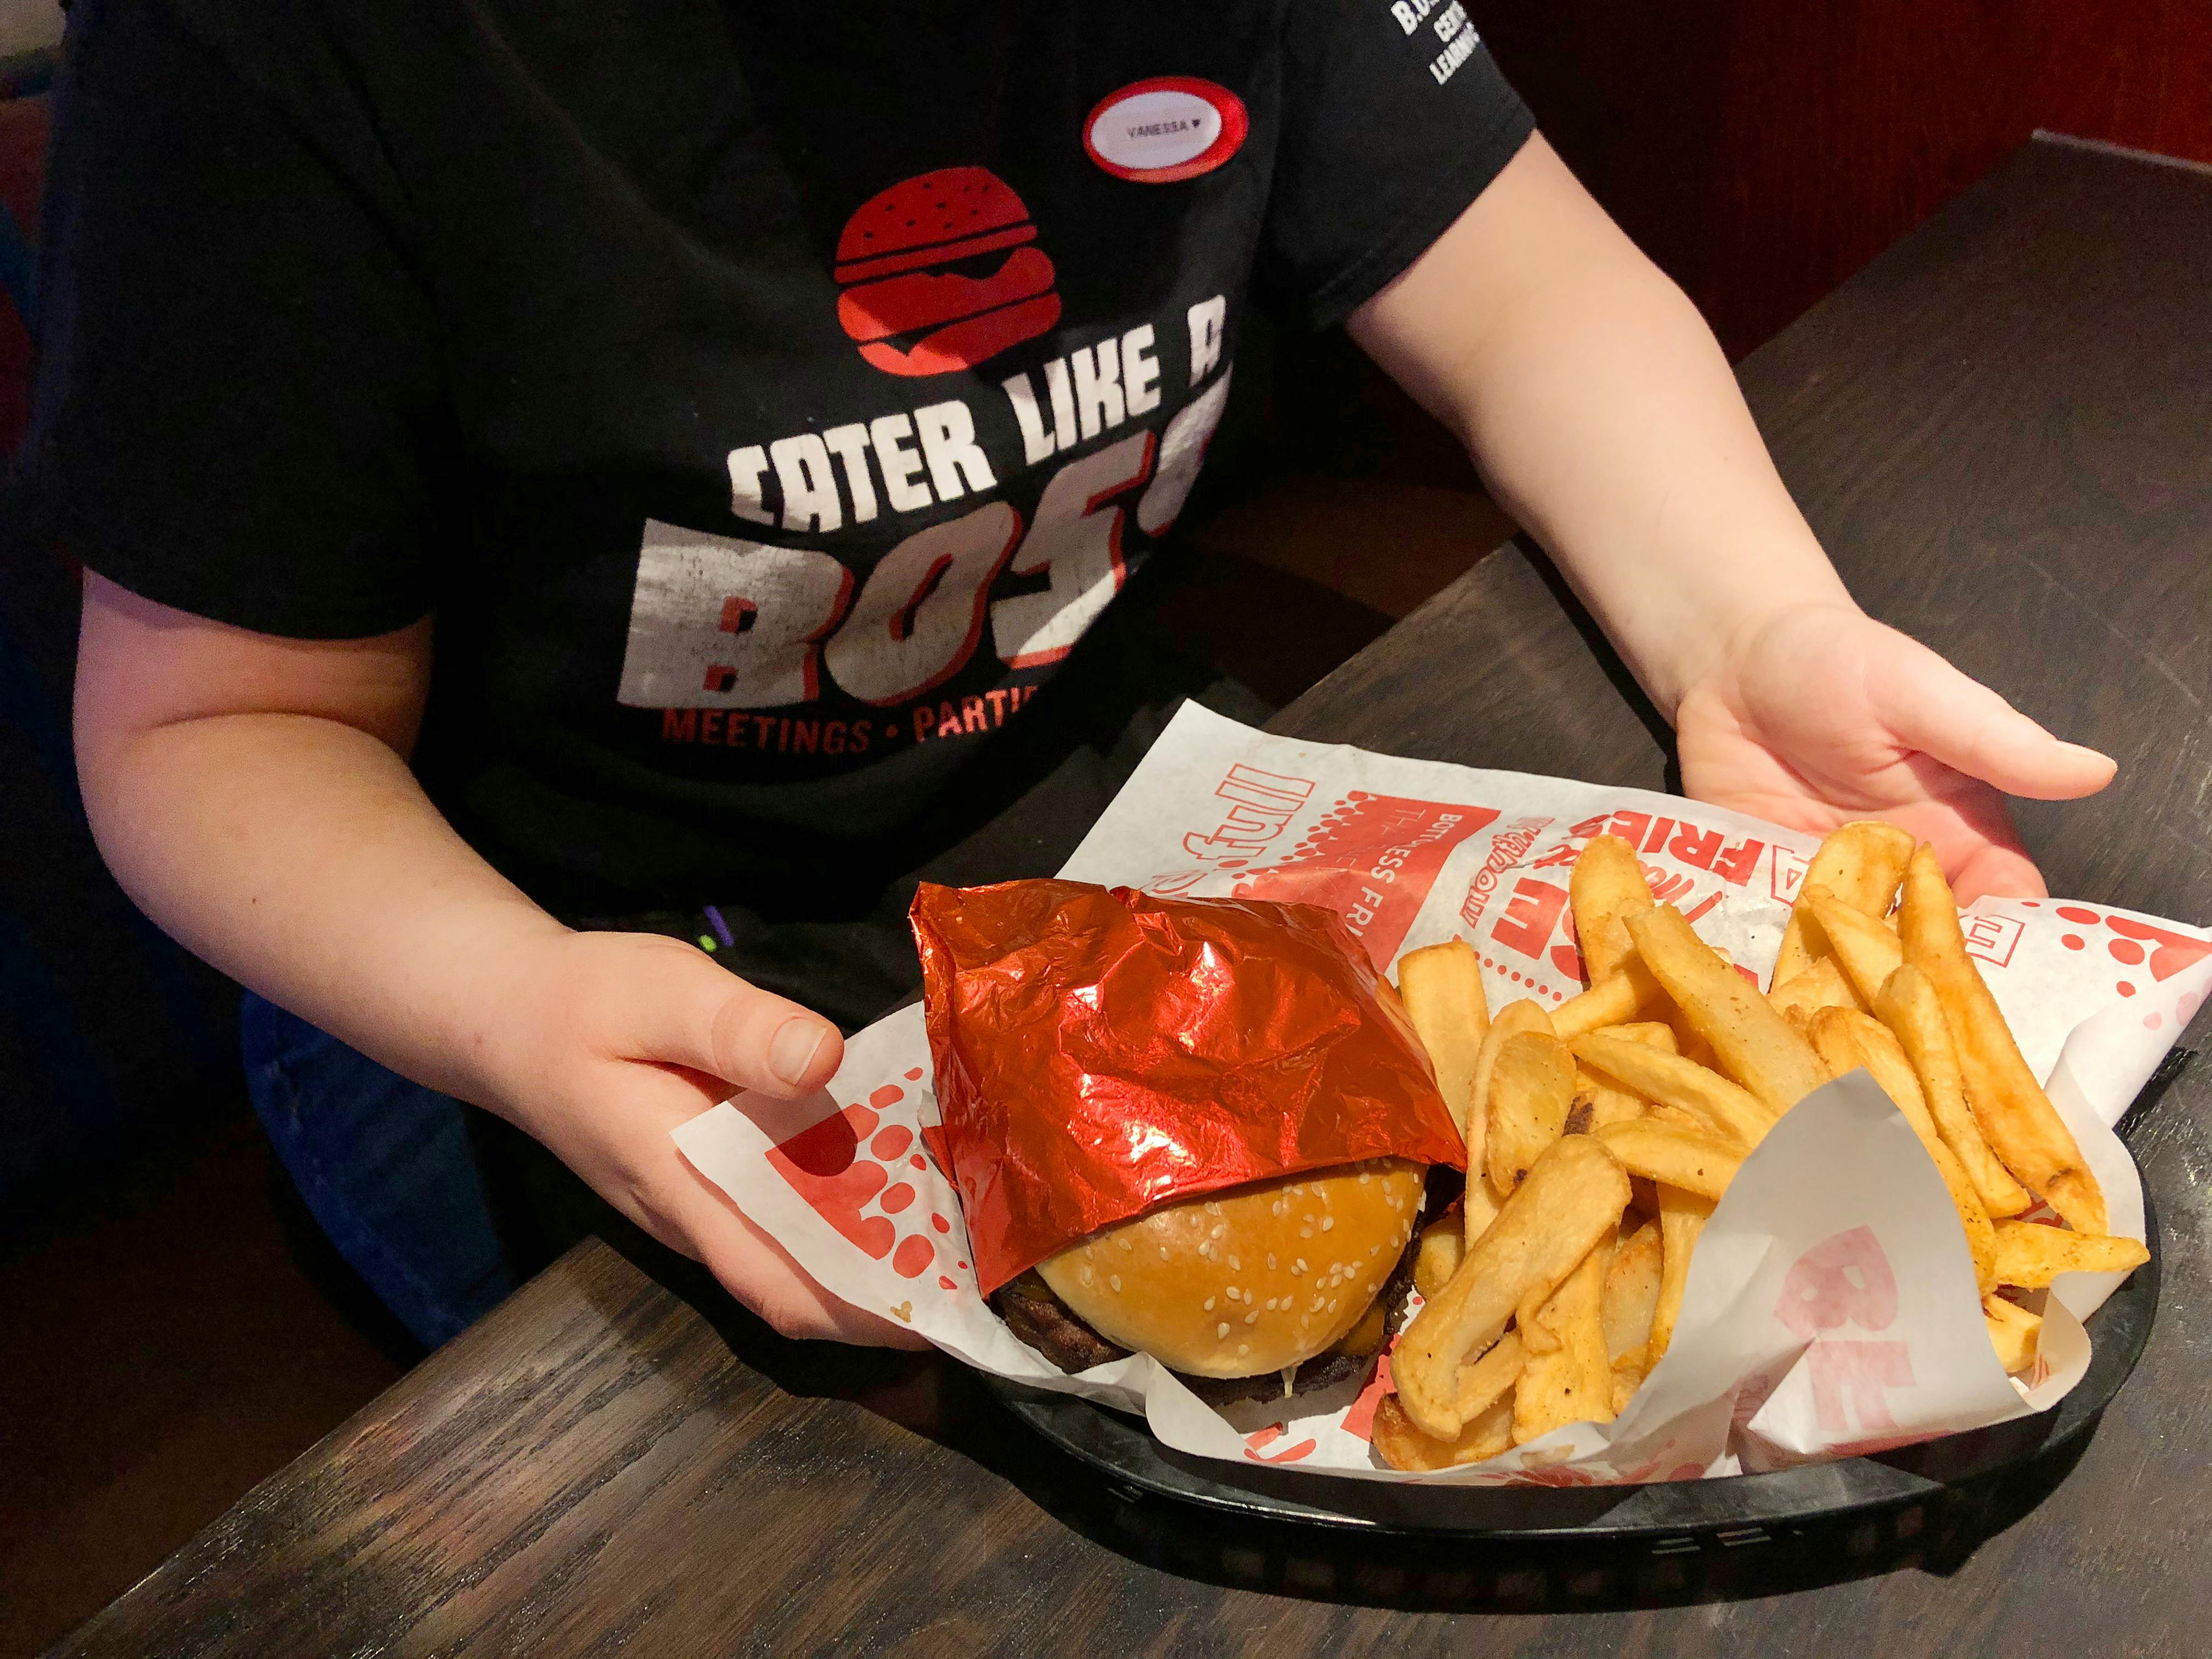 A Red Robin employee sitting in a booth at Red Robin, holding a basket with a burger and fries.